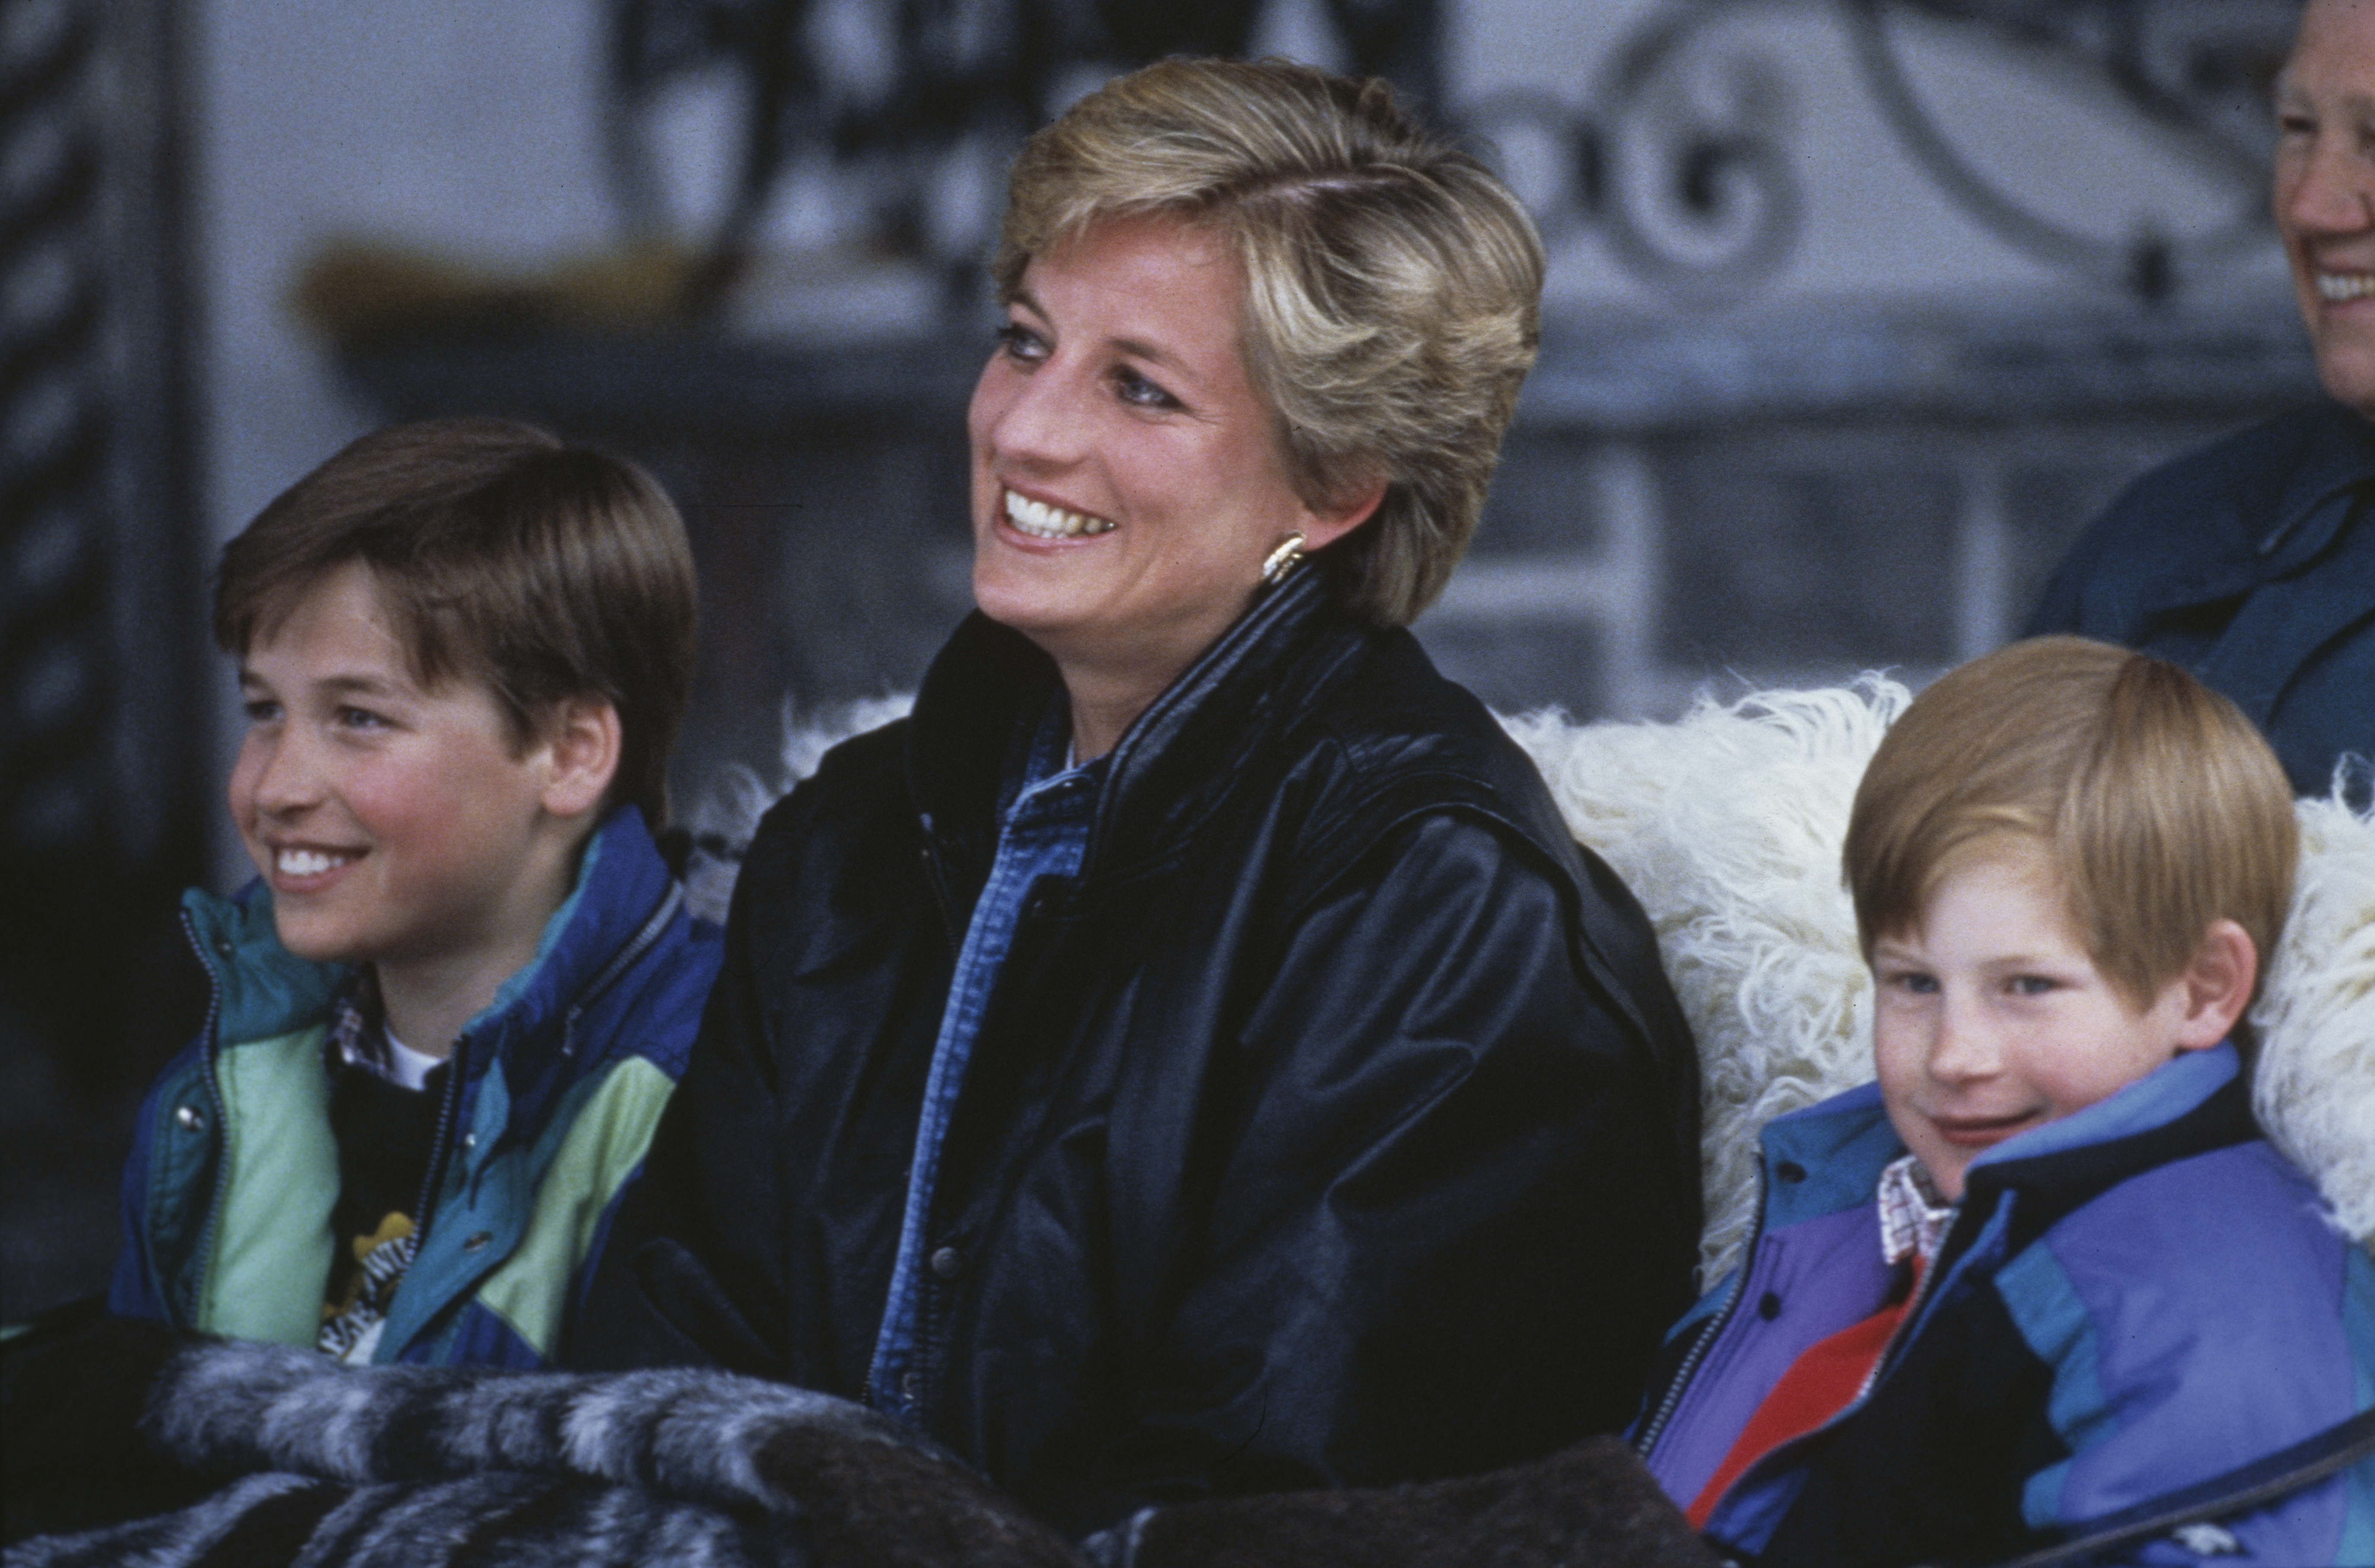 Princess Diana and her sons, Prince William and Prince Harry, on a skiing holiday in Lech, Austria, on March 30, 1993. | Source: Getty Images